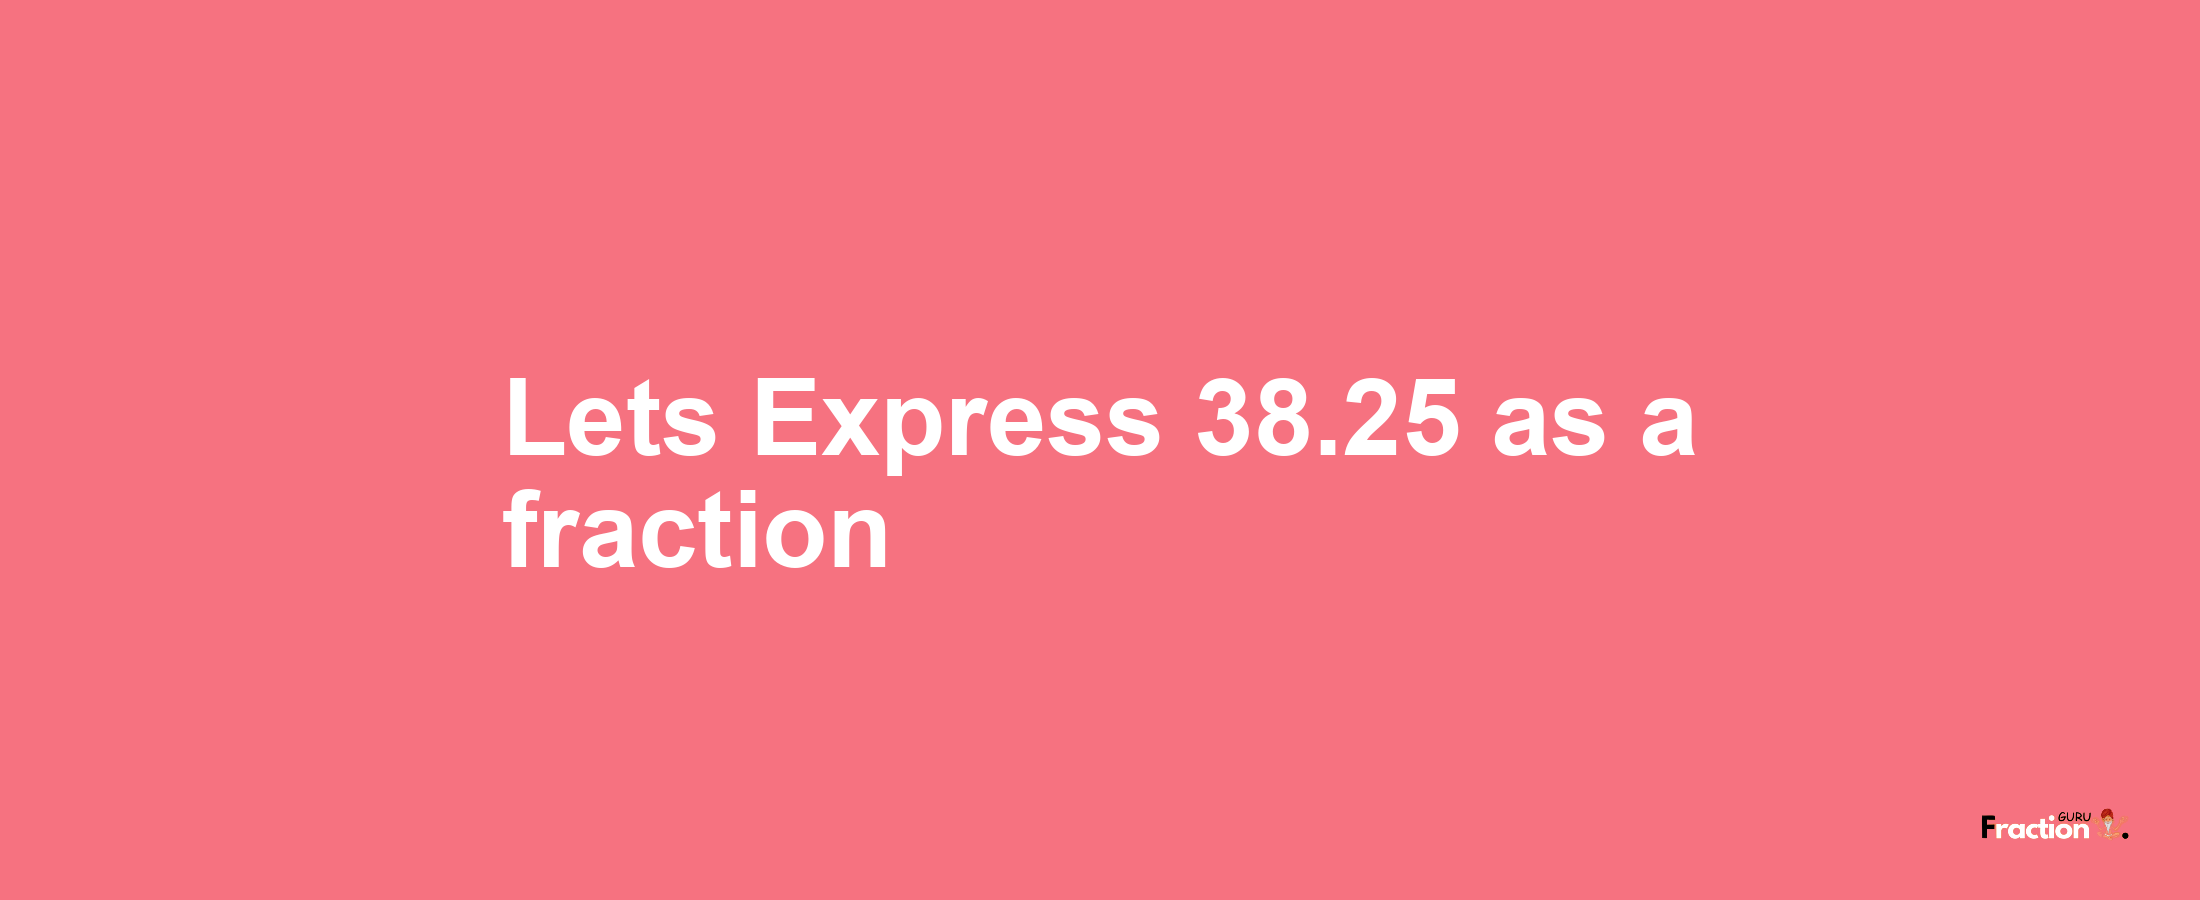 Lets Express 38.25 as afraction